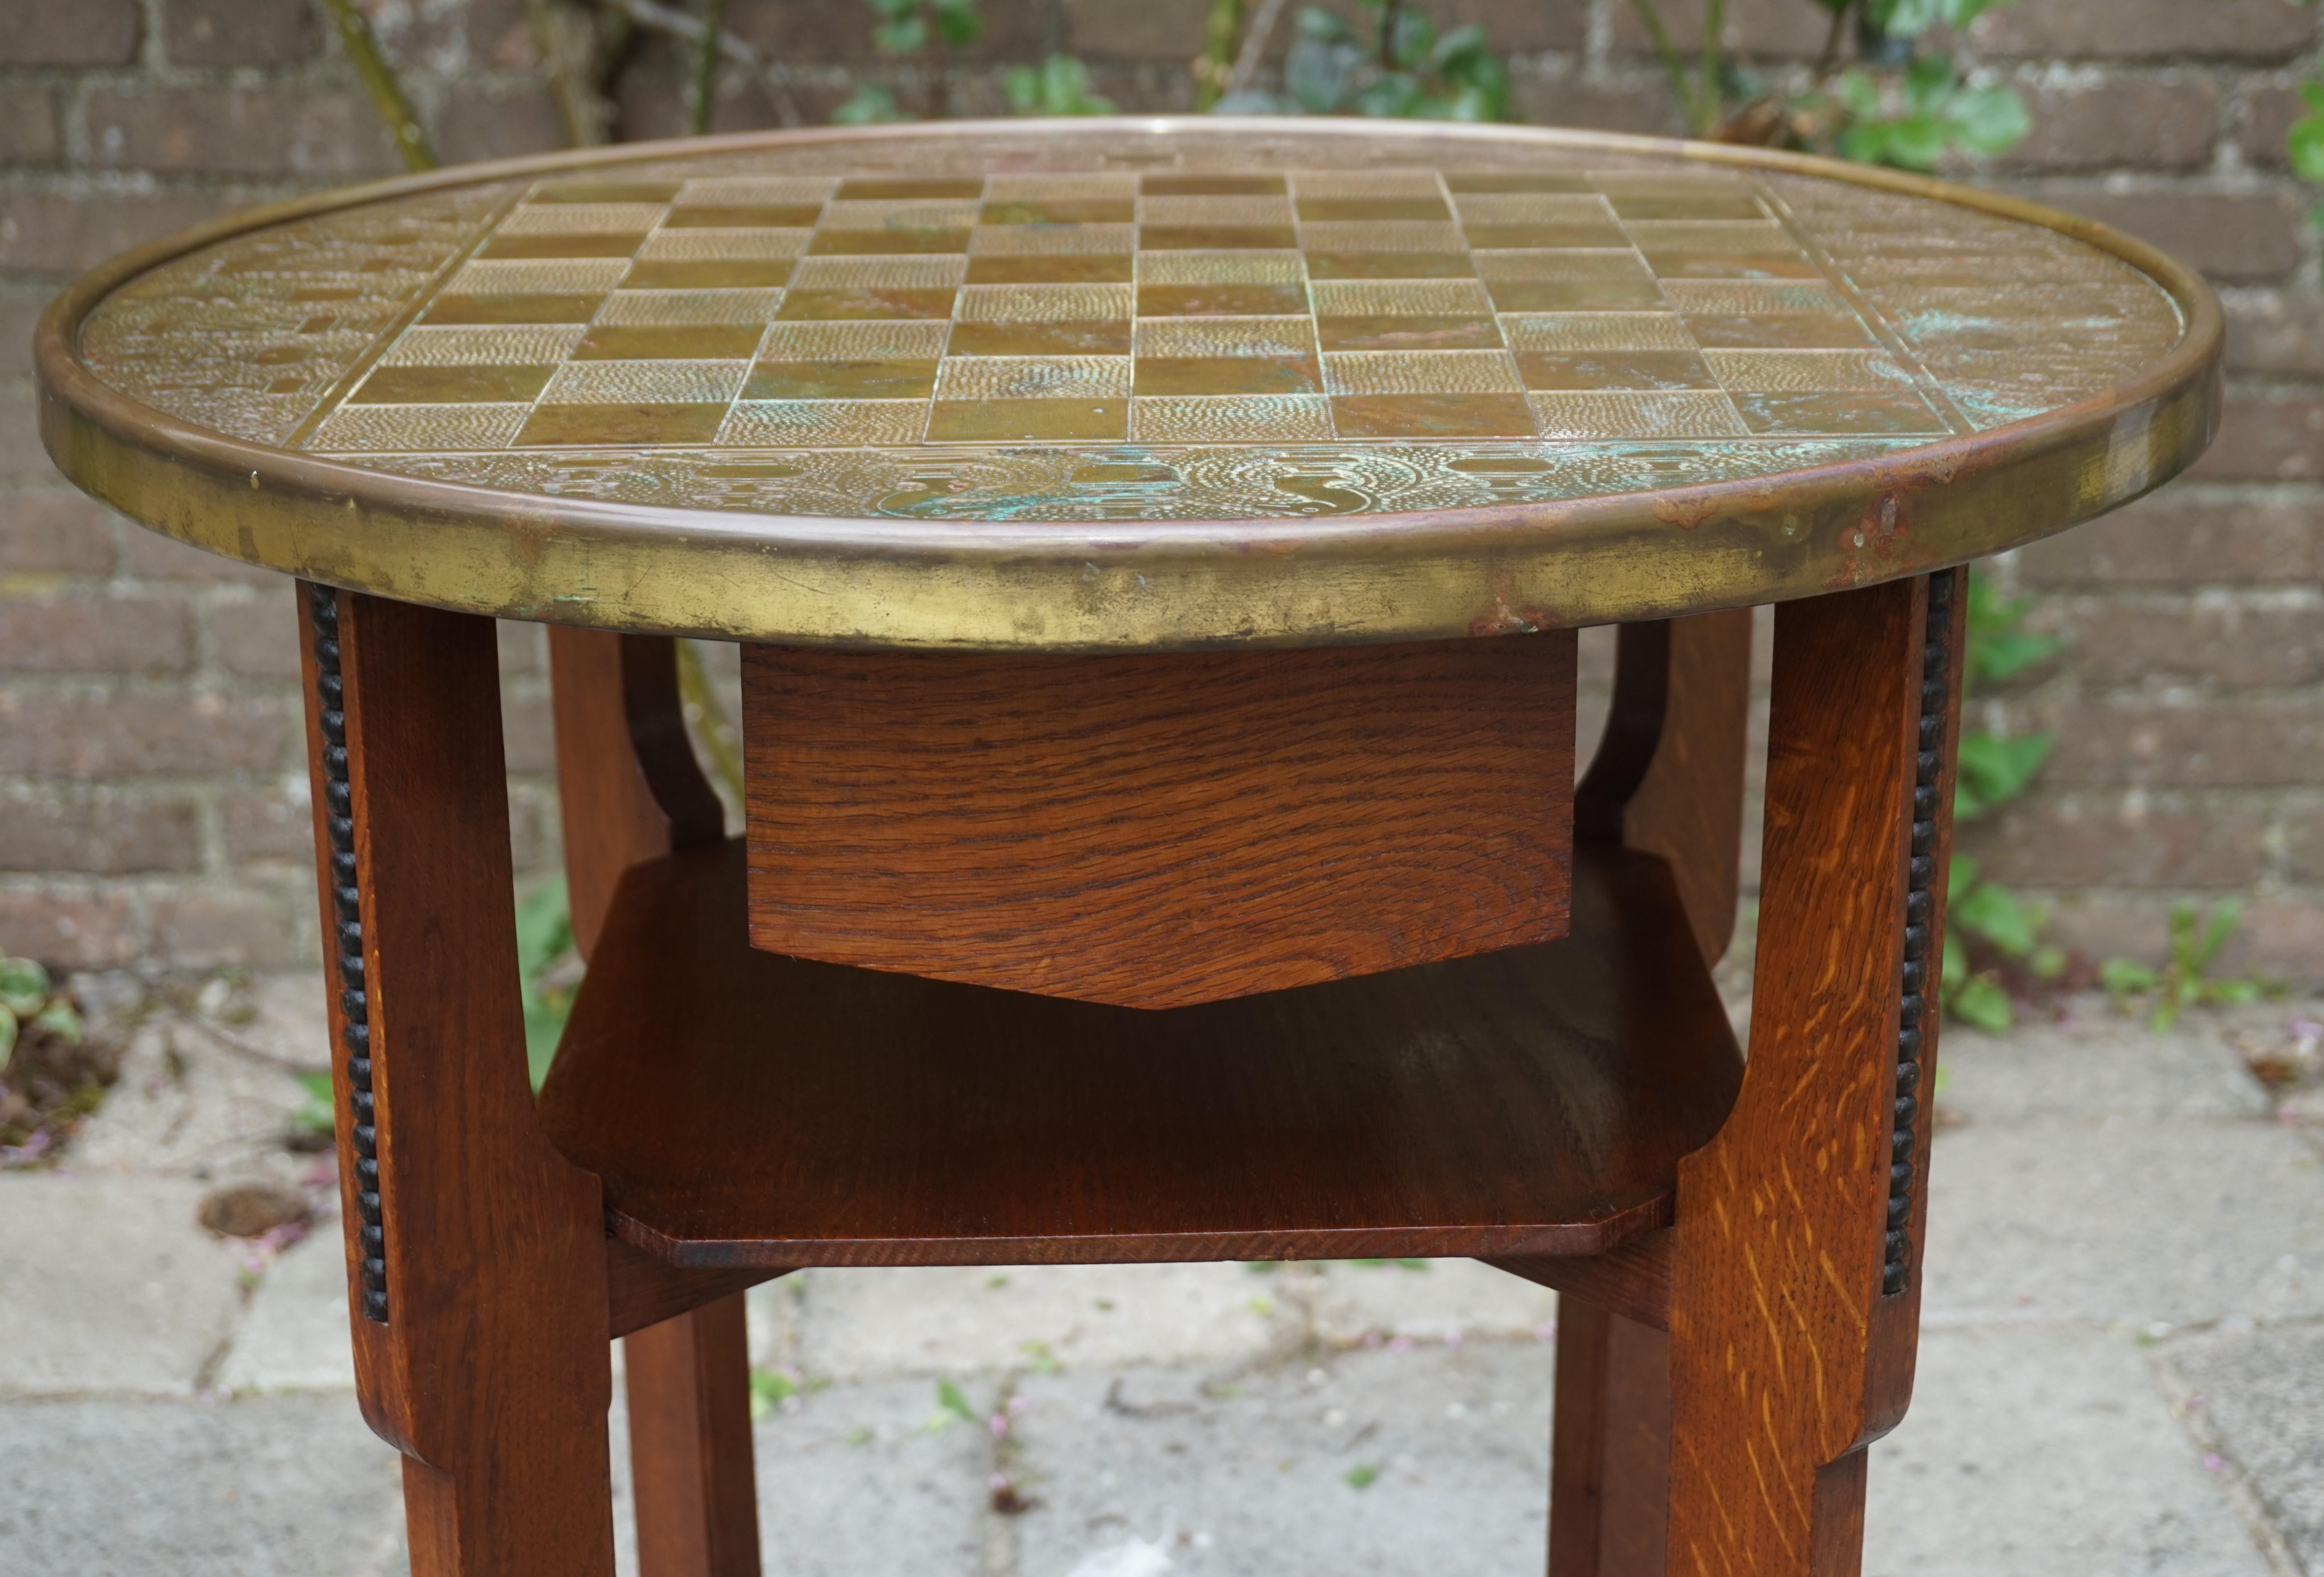 Antique arts and crafts chess table.

We have sold a few antique chess tables before, but never one from the Dutch Arts and Crafts era and never one as stylish and decorative as this one. The combination of the beautifully designed, tiger oak base